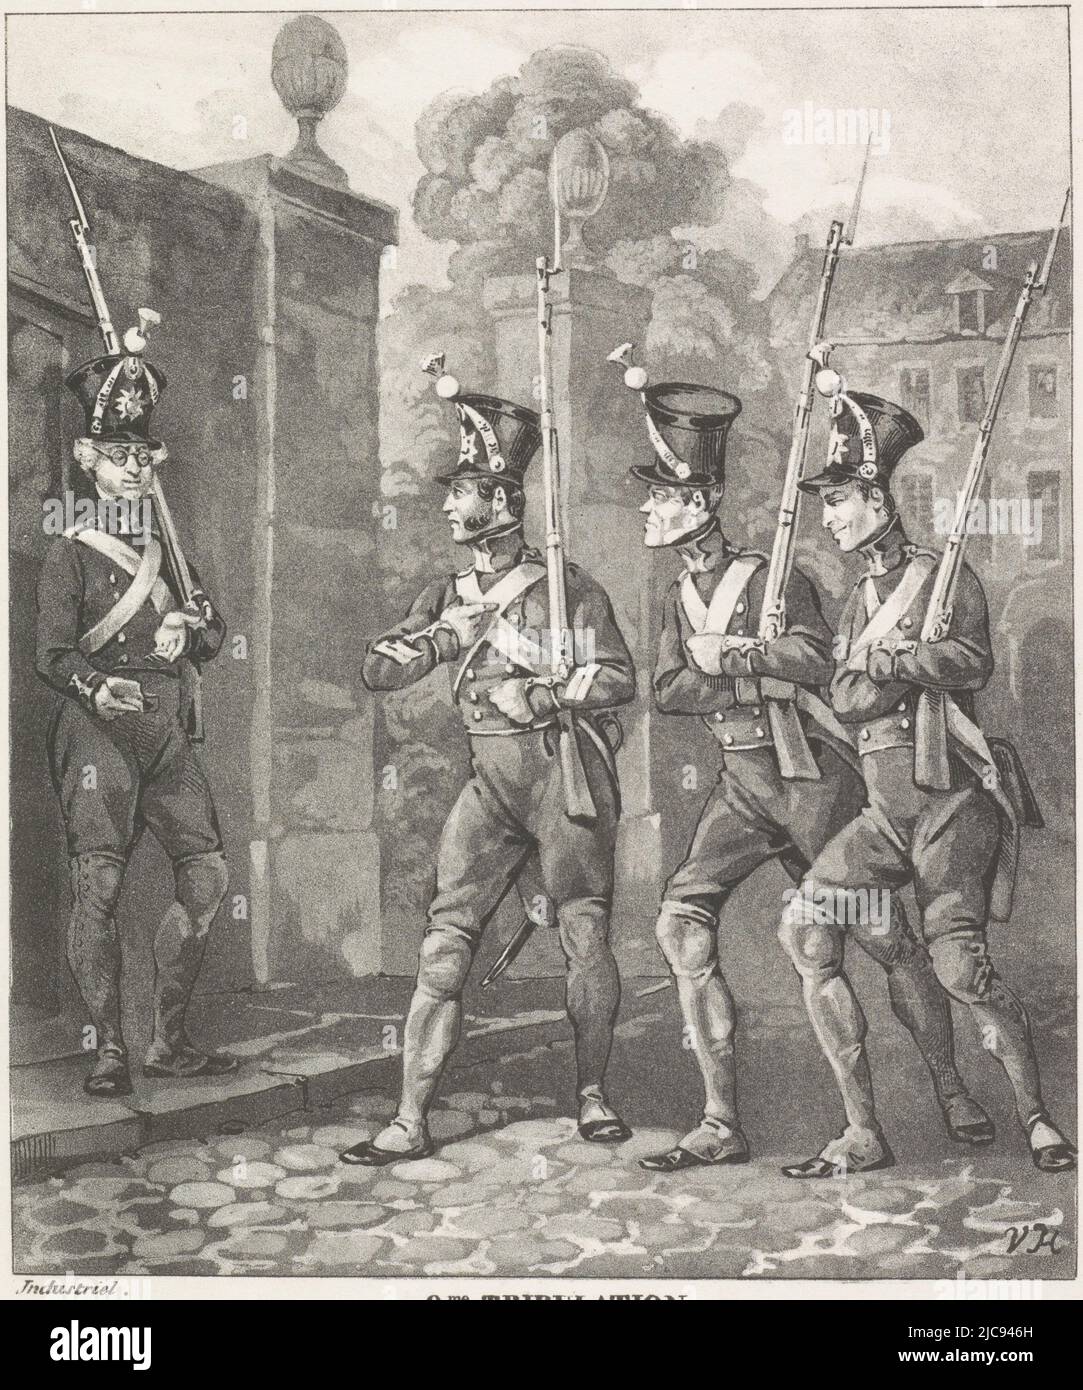 An archer asks a corporal to replace him because he has run out of tobacco. Part of a series of about 24 cartoons from 1828 on the imbalances within the Belgian militia due to social inequality within the corps, following the reorganization introduced on April 11, 1827, Ninth ordeal, 1828 9me Tribulation. Caporal, venez me relever, je n'ai plus de tabac Cartoons on the imbalances within the Belgian militia, 1828 , print maker: Jean-Louis Van Hemelryck, (mentioned on object), Southern Netherlands, 1828, paper, h 268 mm × w 222 mm Stock Photo